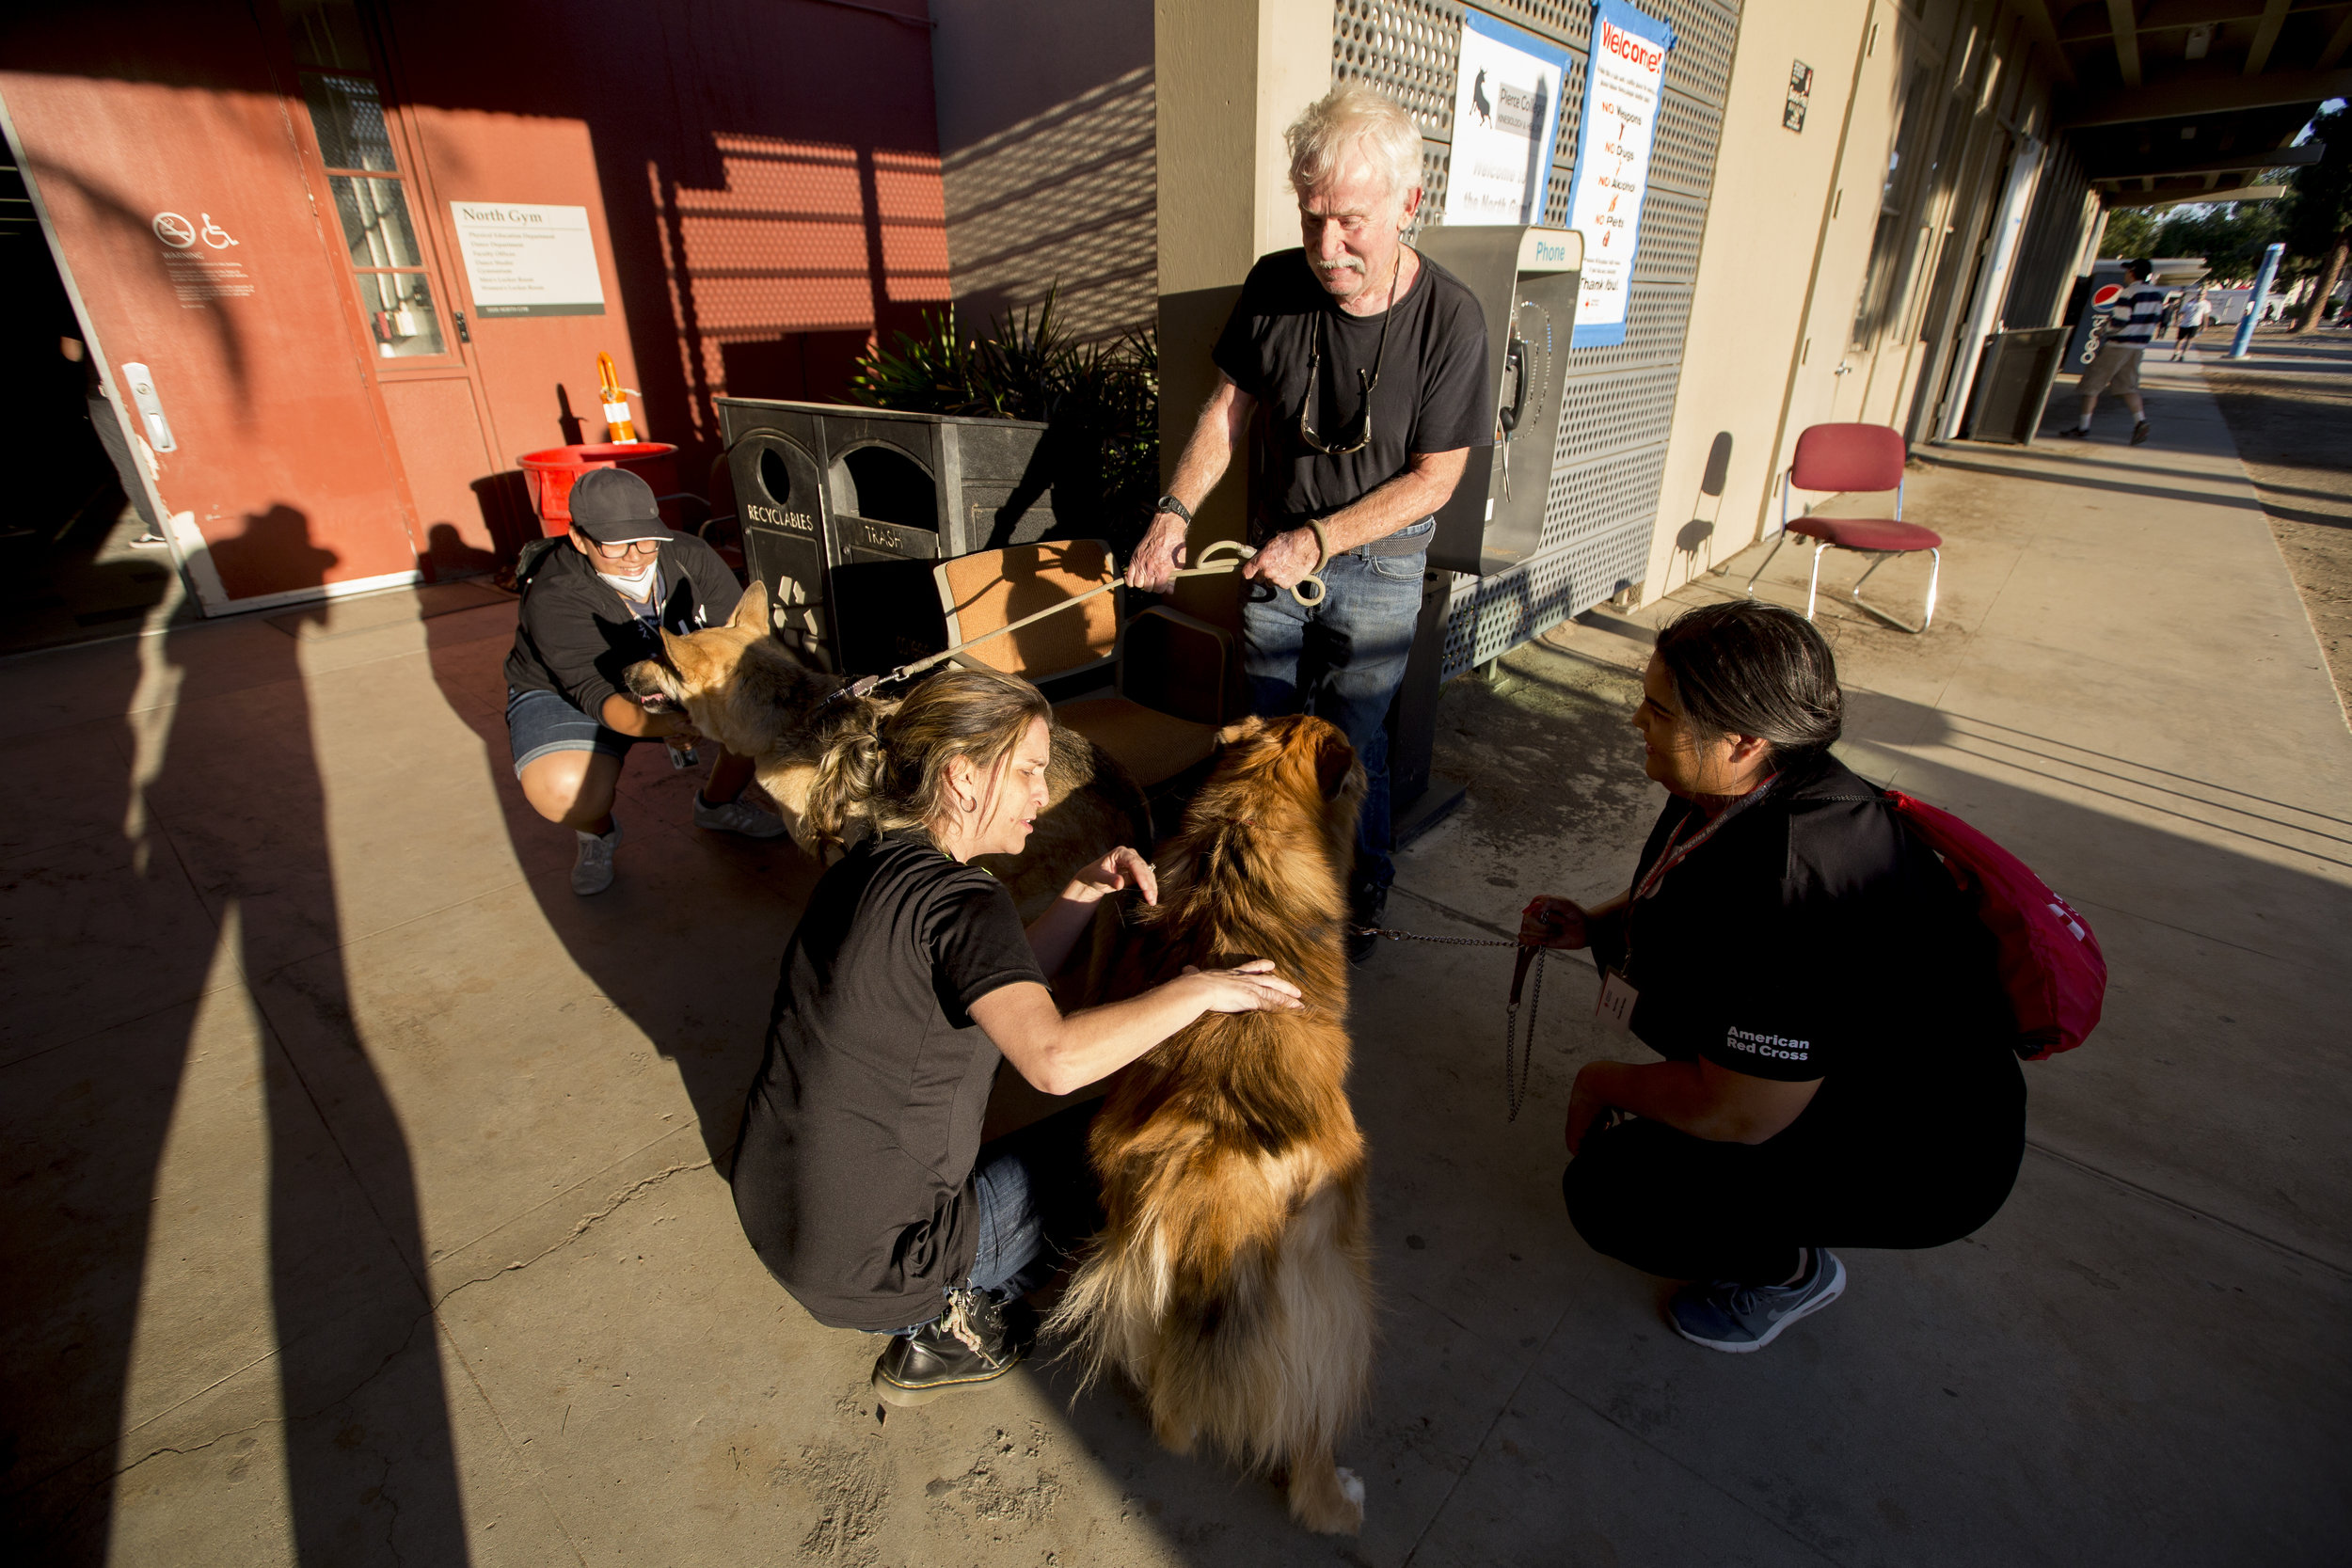  An evacuee arrives with his pets at the Woolsey fire evacuation center set up at Los Angeles Pierce College on November 9, 2018 in Woodland Hills, Calif. (Jose Lopez) 